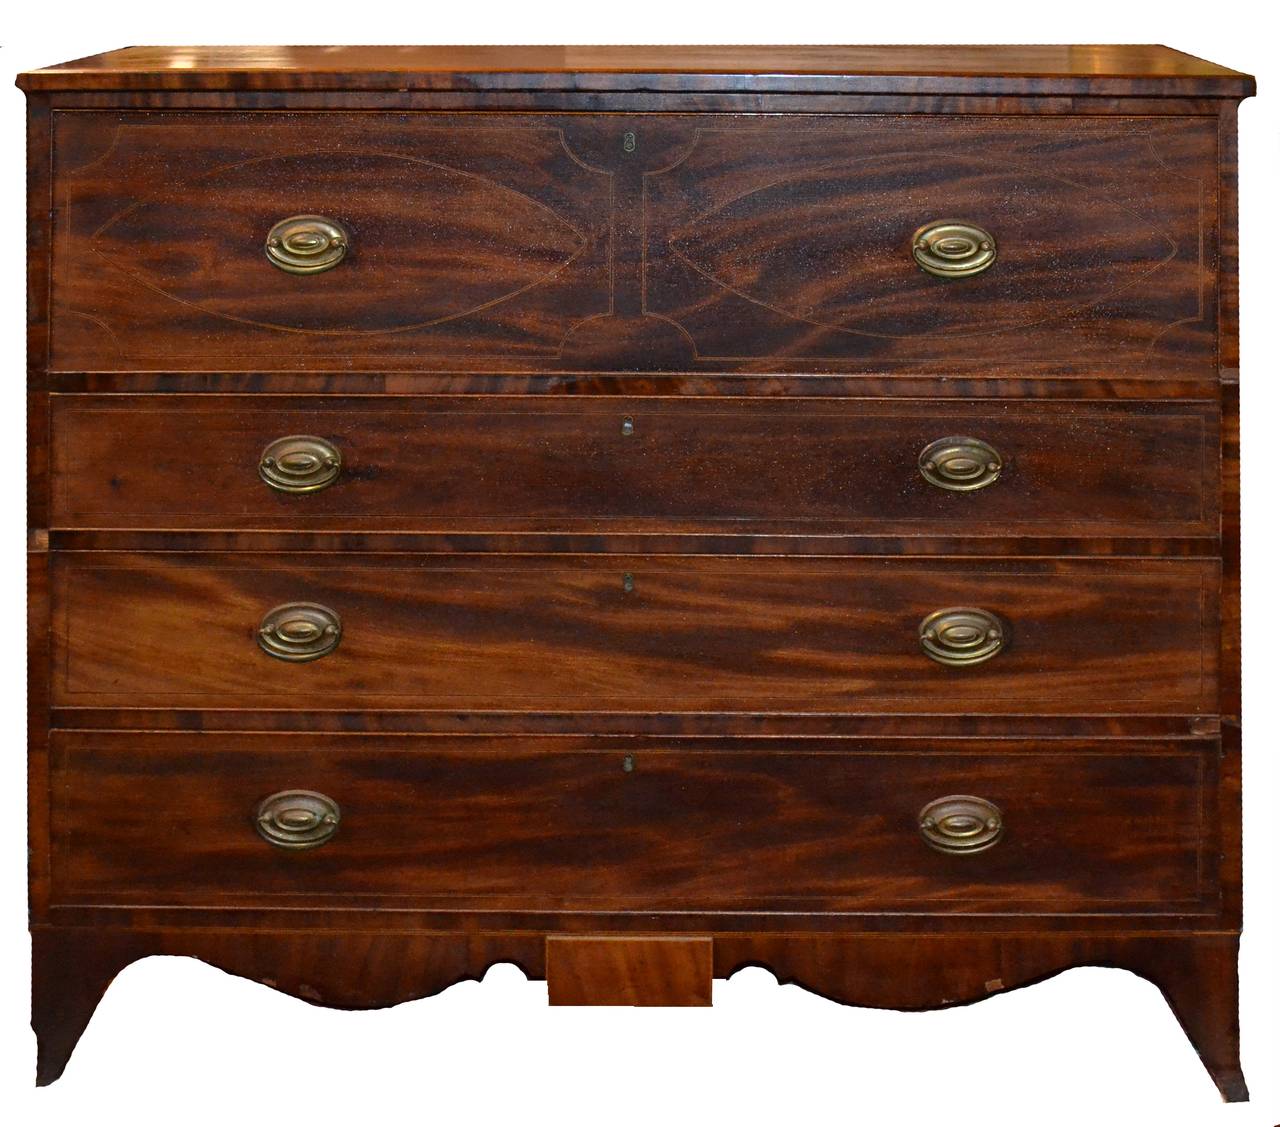 Rare American Federal 1780-1810 Hepplewhite fall front Secretary/Butlers Dresser. North Eastern Massachusetts or New Hampshire style with front "drop tablet" skirt trim. Inlaid rare woods and burl veneer trim. Provenance: signed drawer